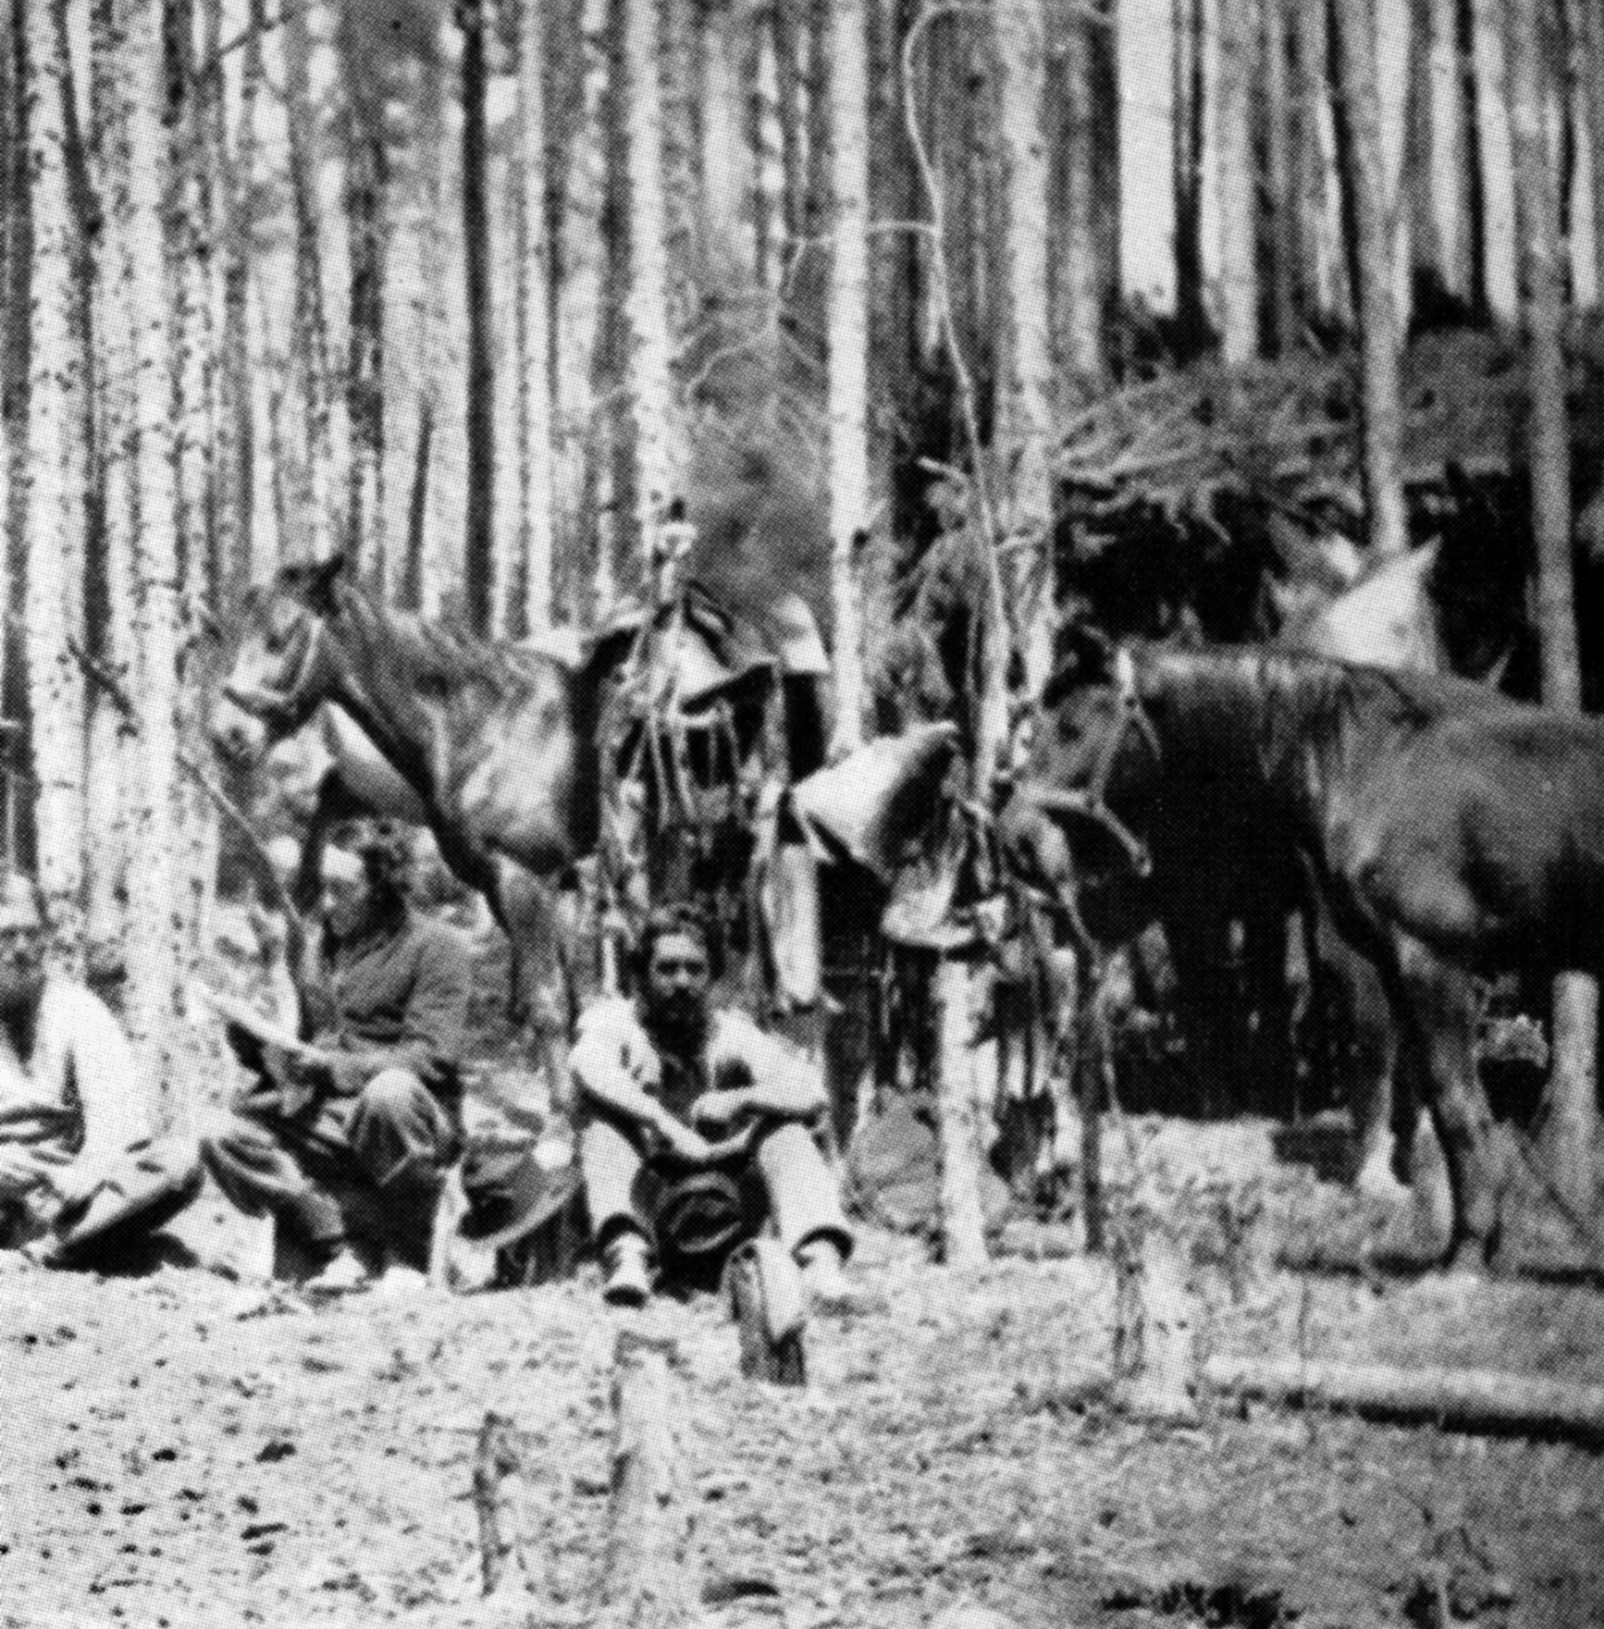 Union cavalry rest while on an expedition. Forrest gave them little opportunity for idle time at Brice’s Cross Roads. 